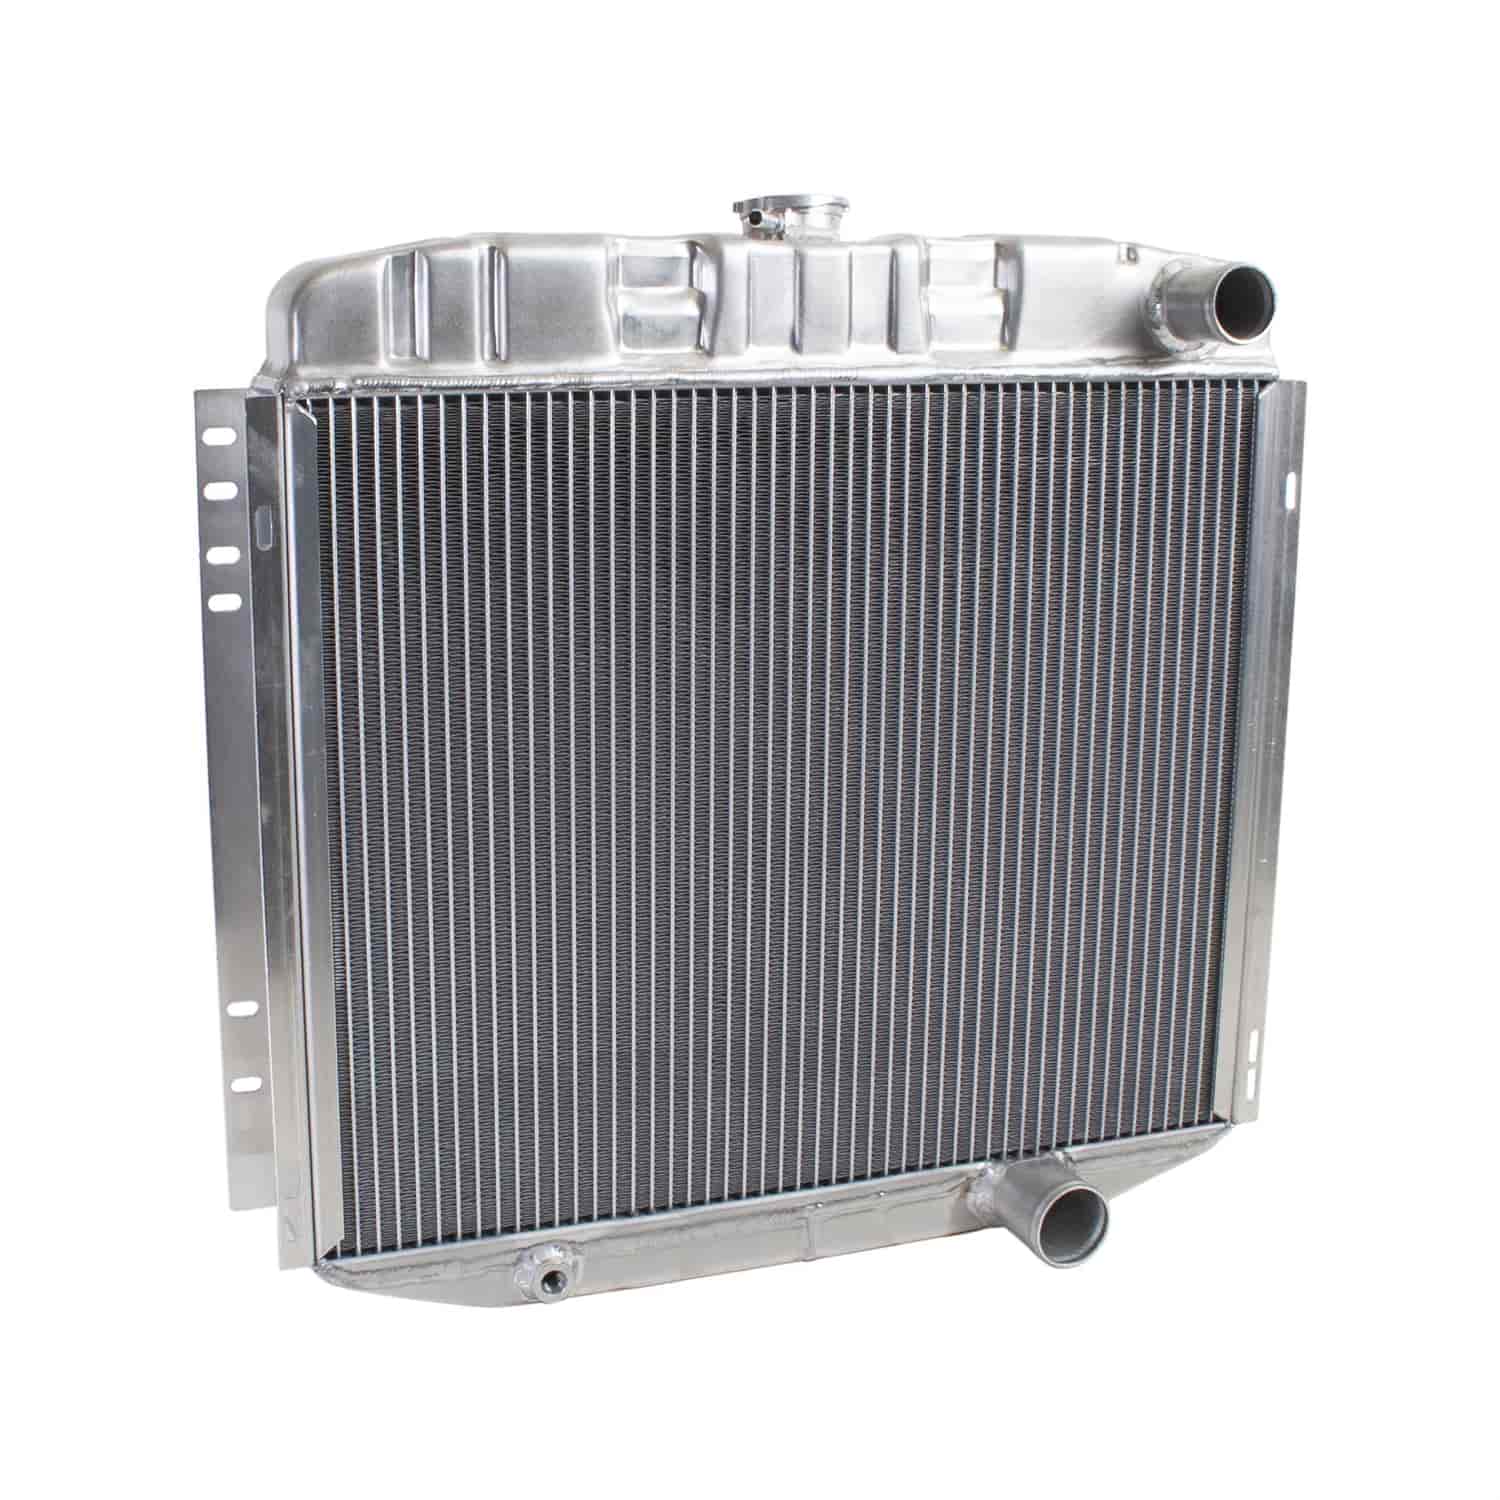 ExactFit Radiator for 1967-1970 Ford Mustang/Mercury Cougar with